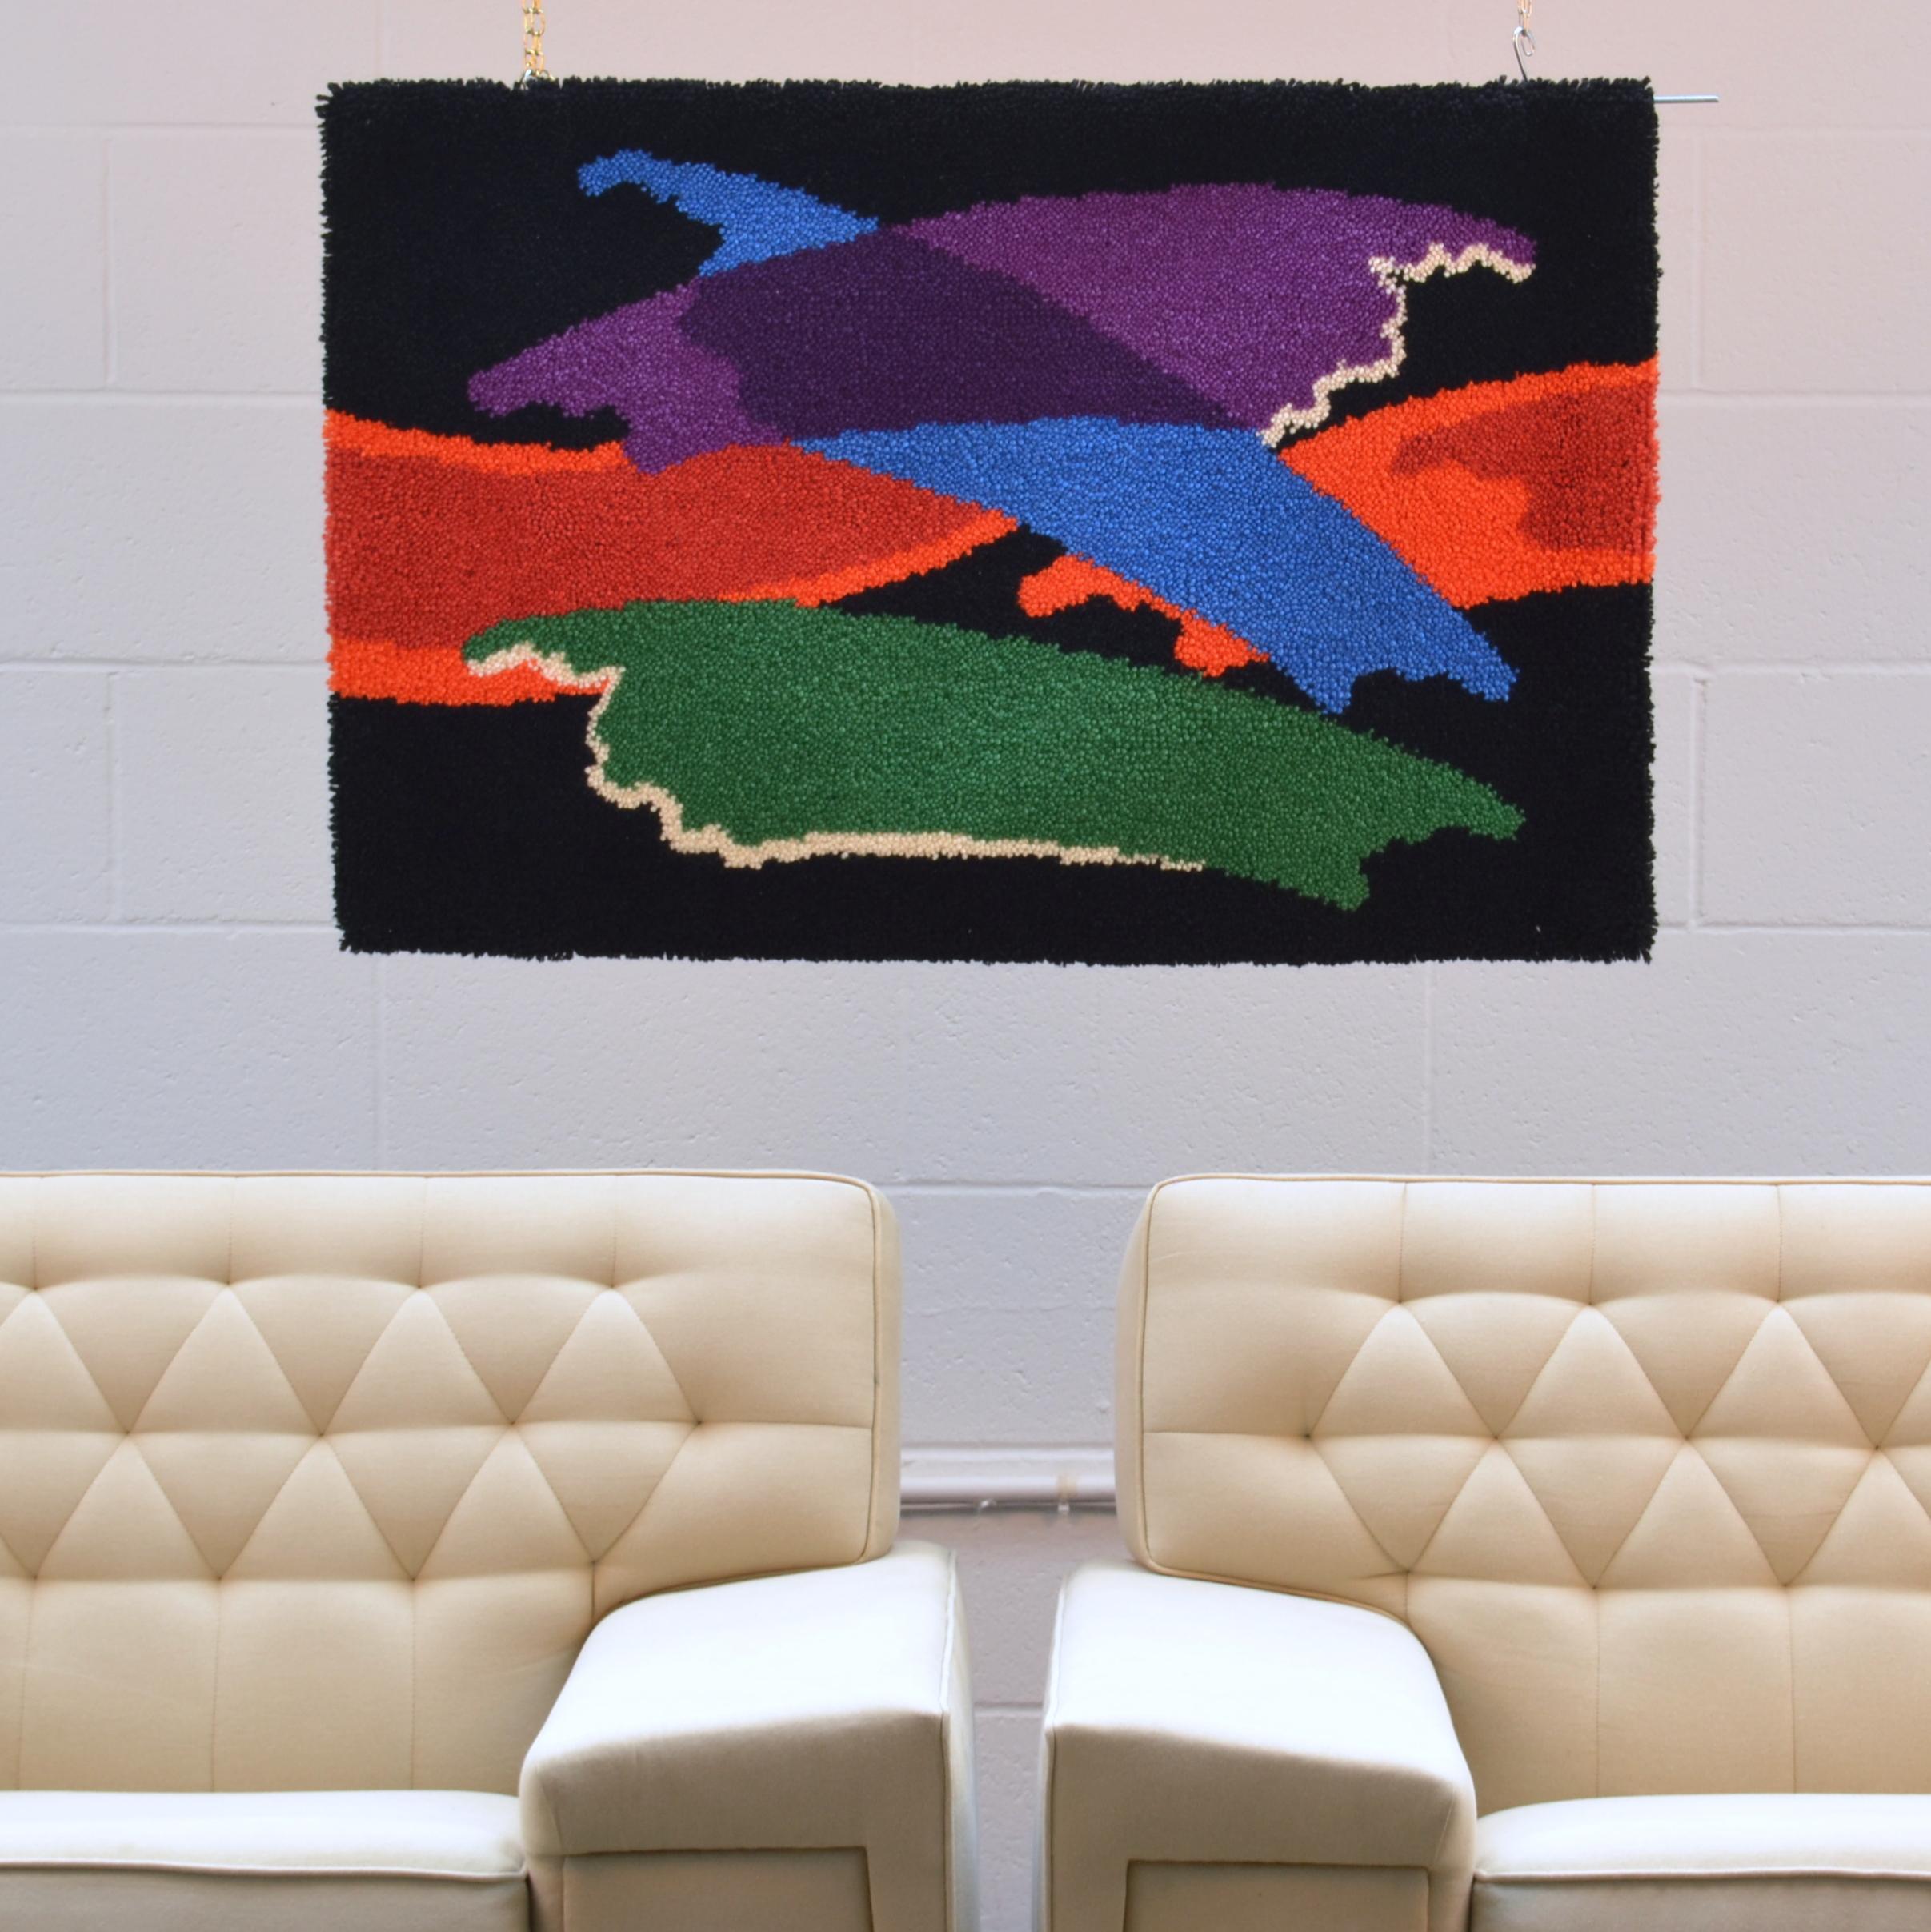 Colorful hand knotted wool hanging is probably a translation of the work of an artist. This was a time when modern artists work began to work with weavers who would translate their paintings into a tufted canvas. The resurgence of tapestries in the